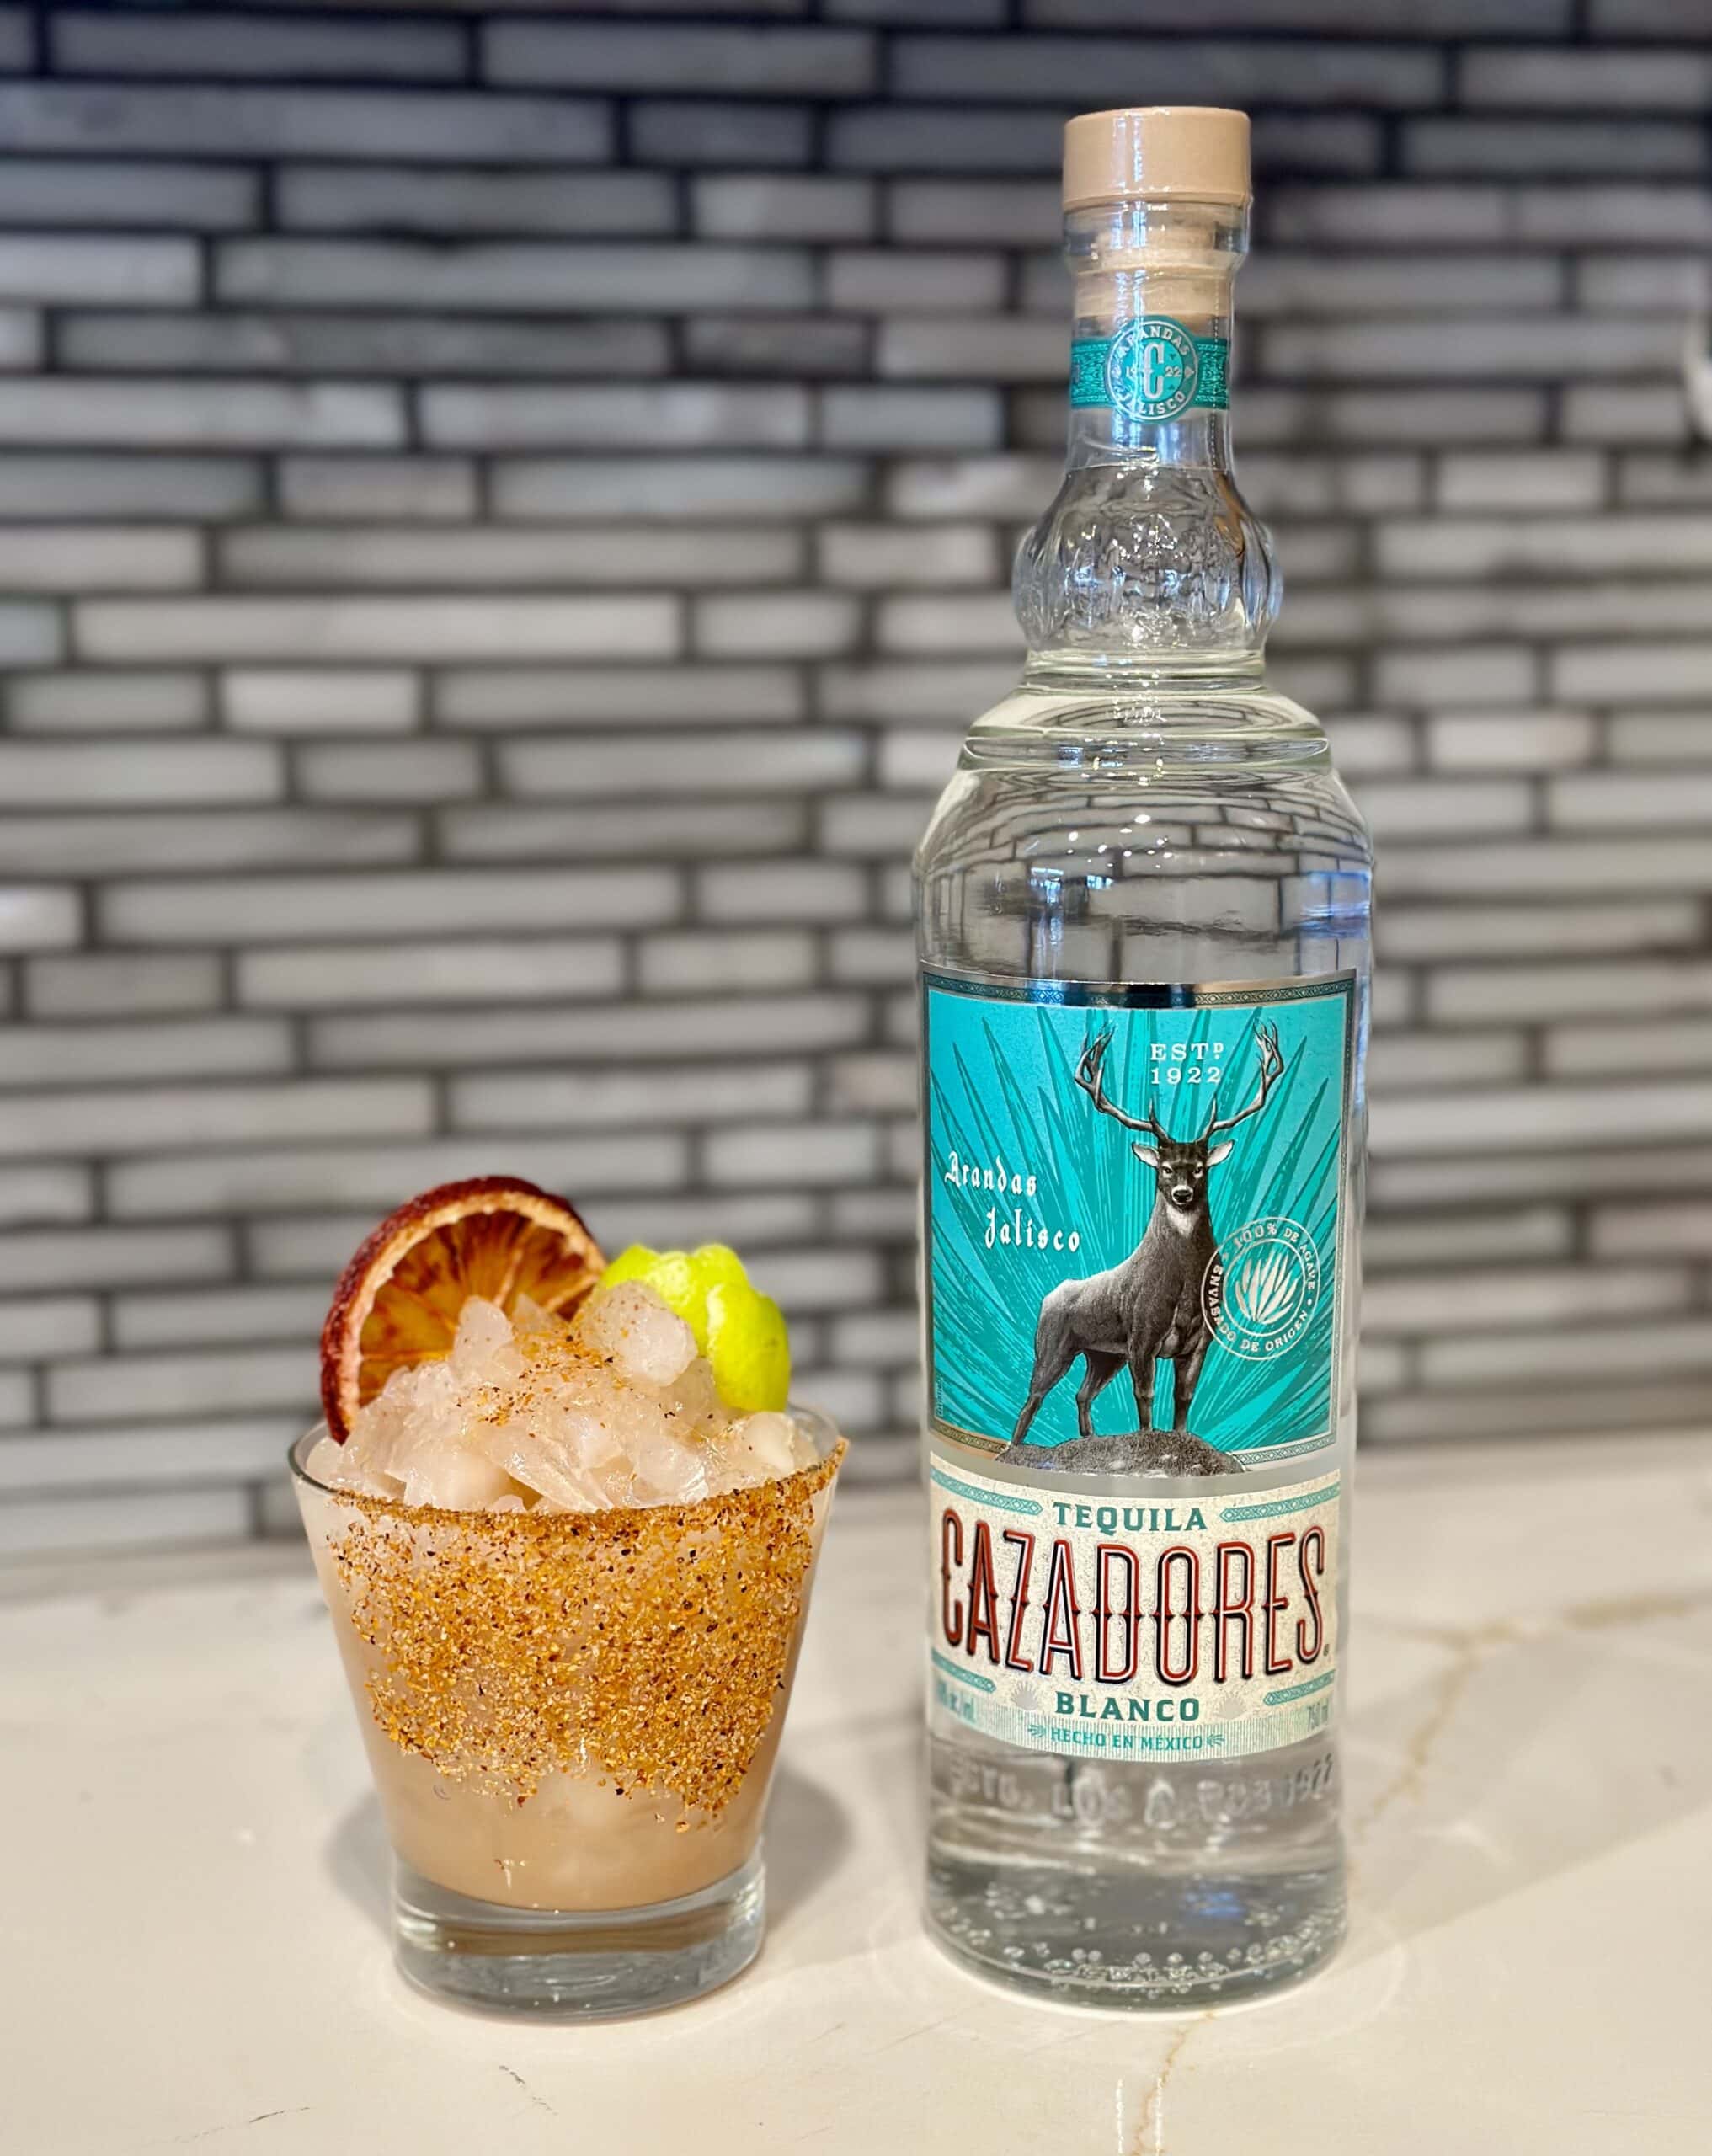 Cazadores blanco tequila bottle and margarita with tamarind